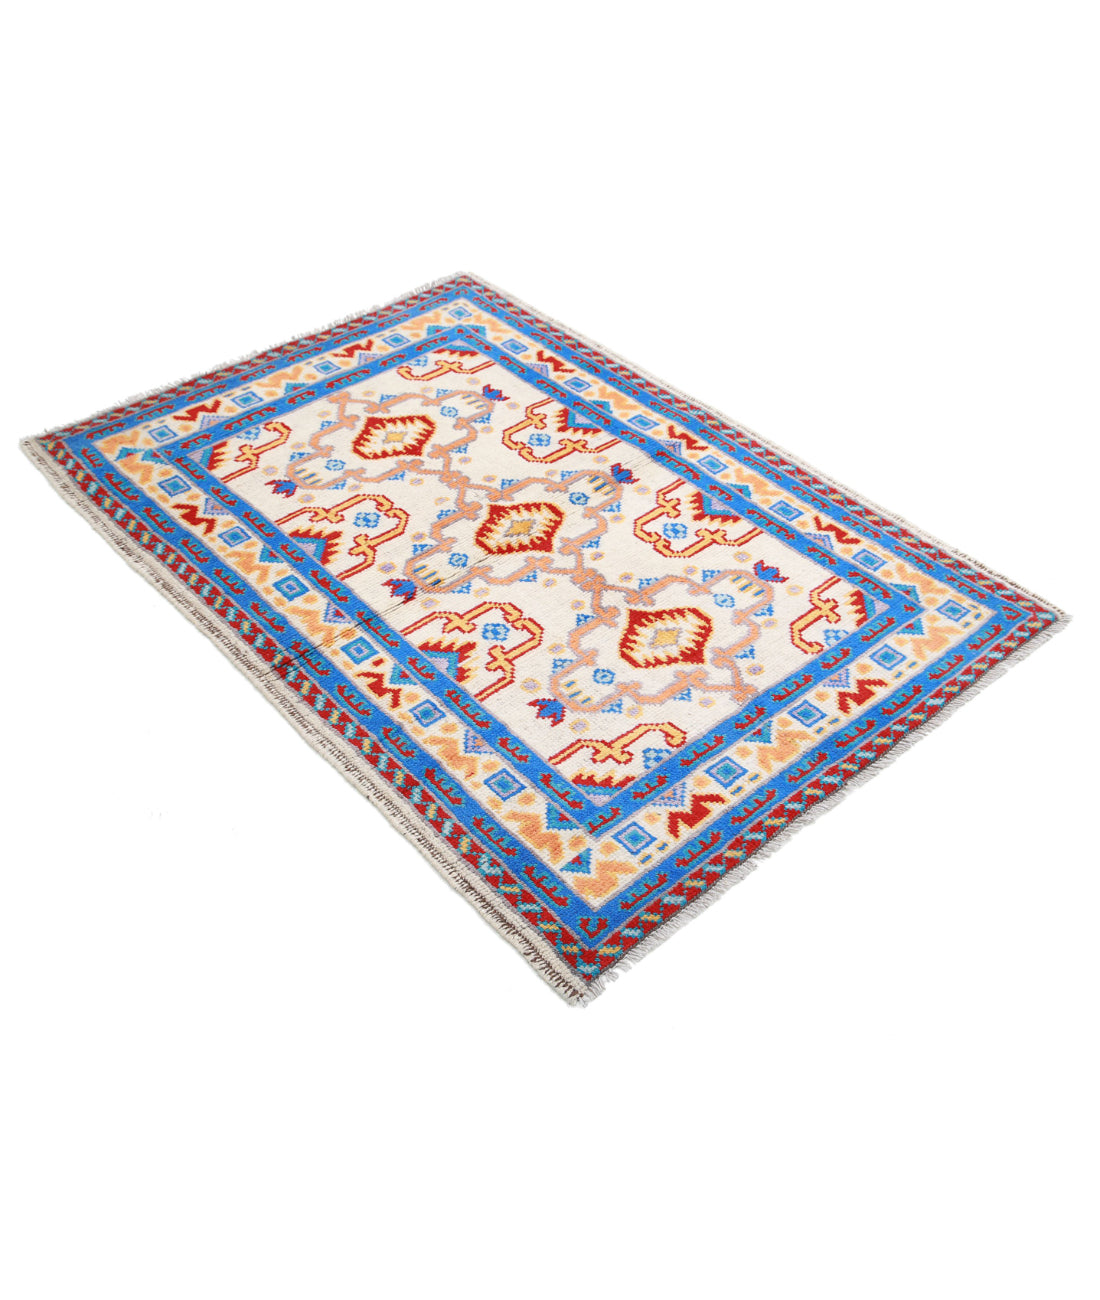 Revival 3'5'' X 5'0'' Hand-Knotted Wool Rug 3'5'' x 5'0'' (103 X 150) / Ivory / Blue